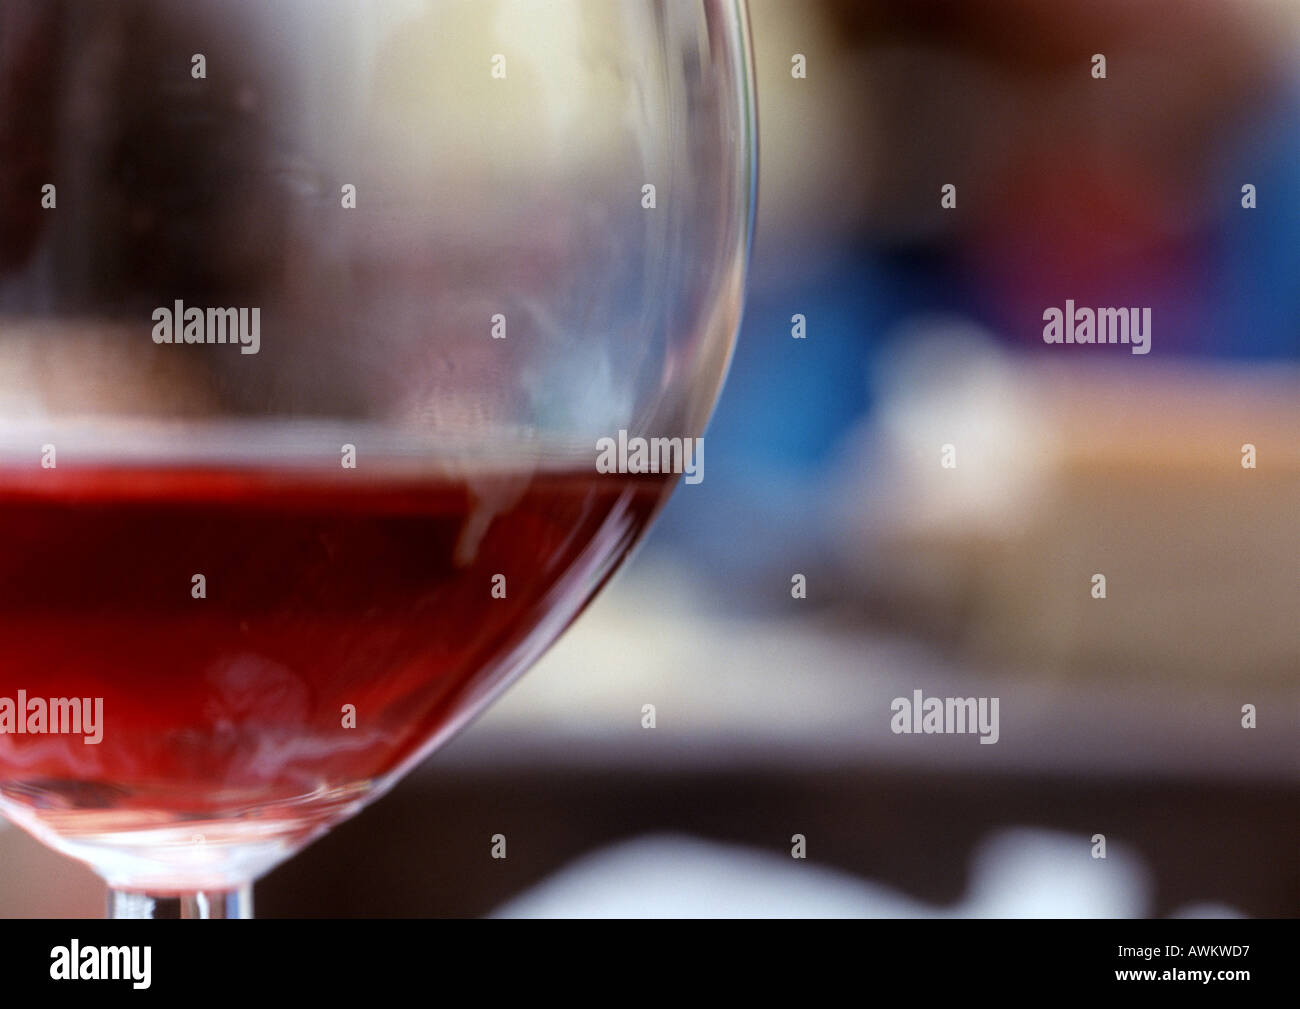 Red wine in glass, extreme close-up Stock Photo